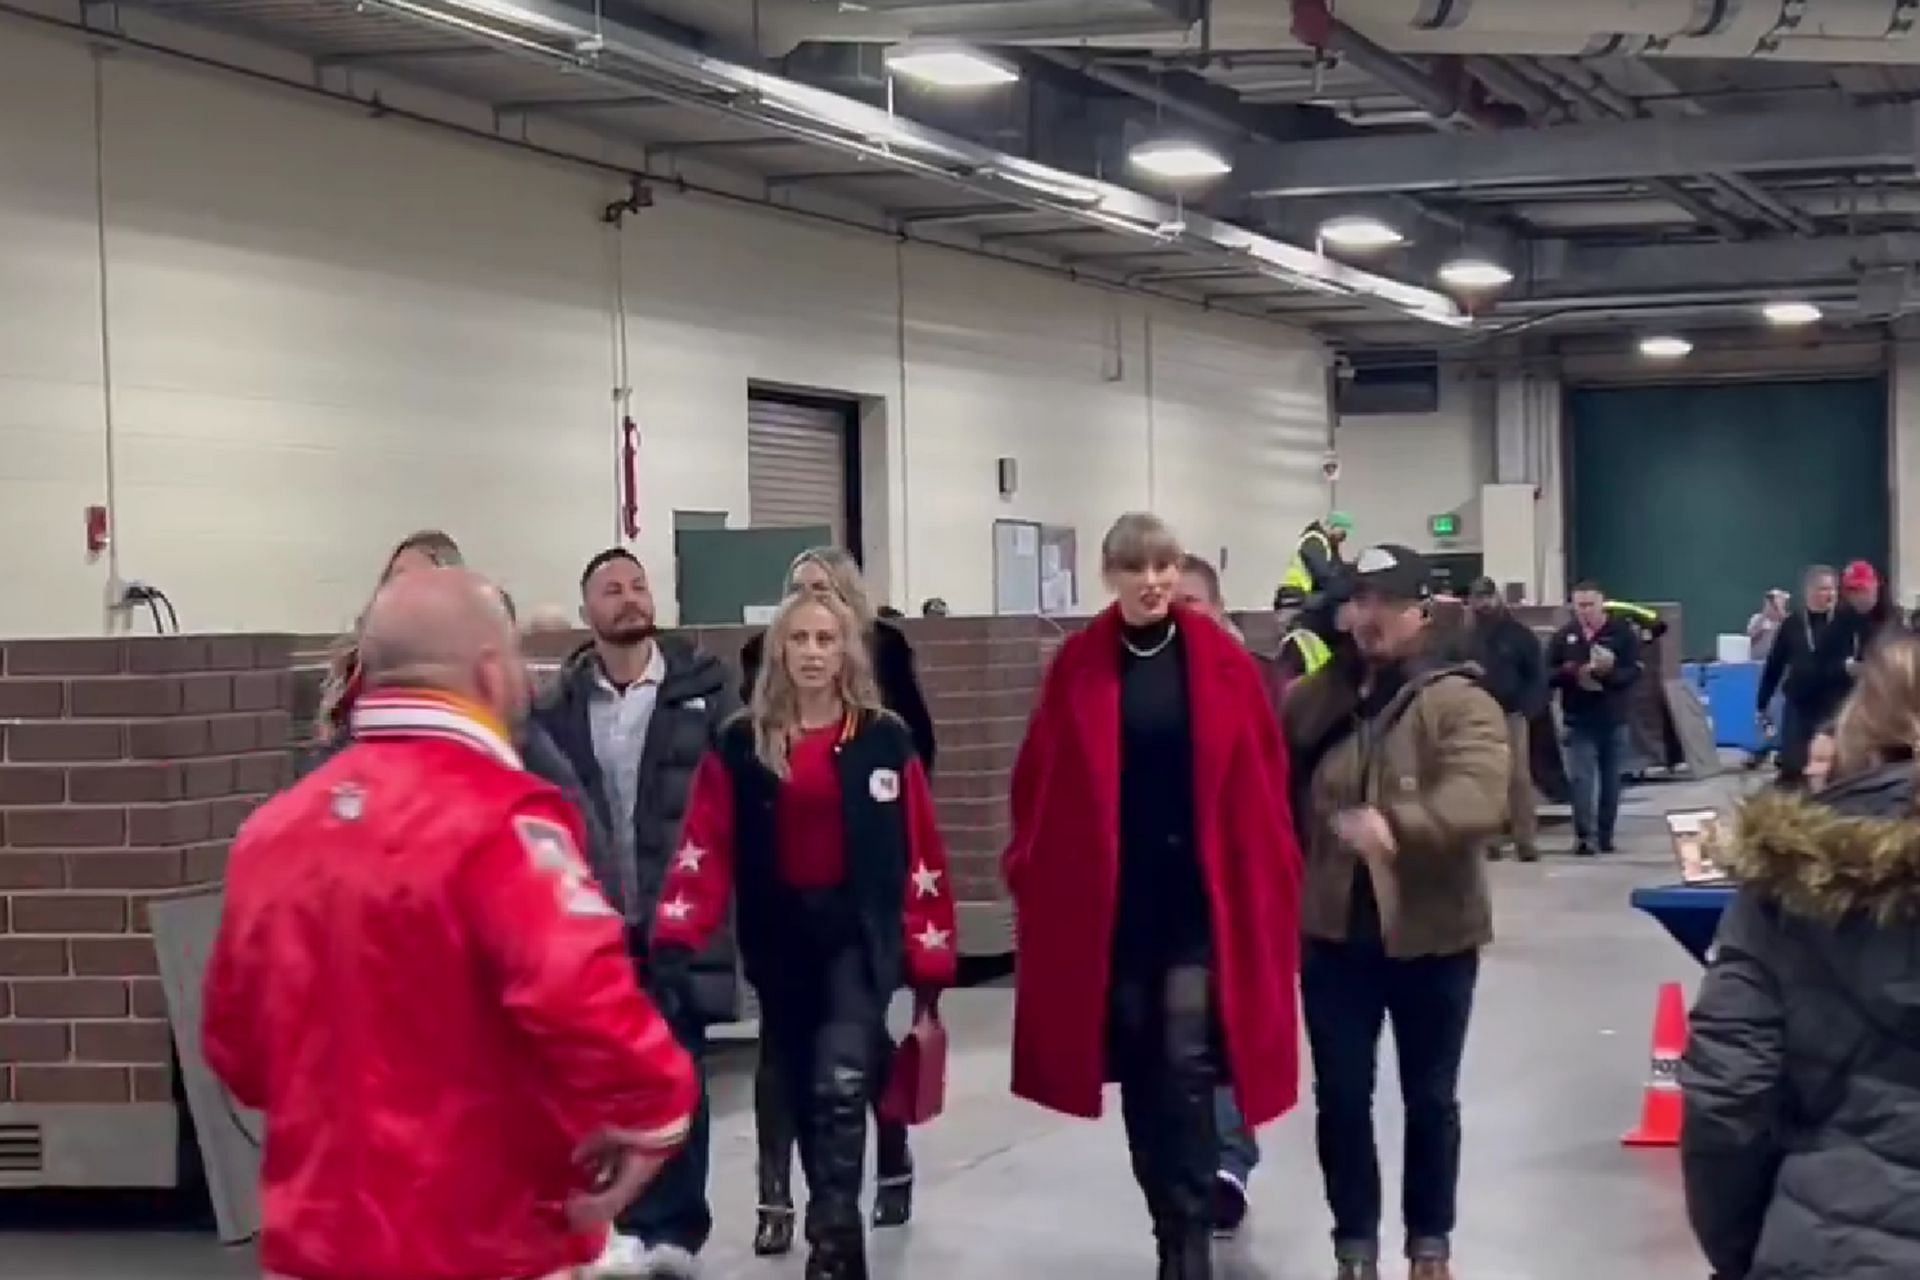 Taylor Swift, Brittany Mahomes arrive in style at Lambeau Field for Travis Kelce